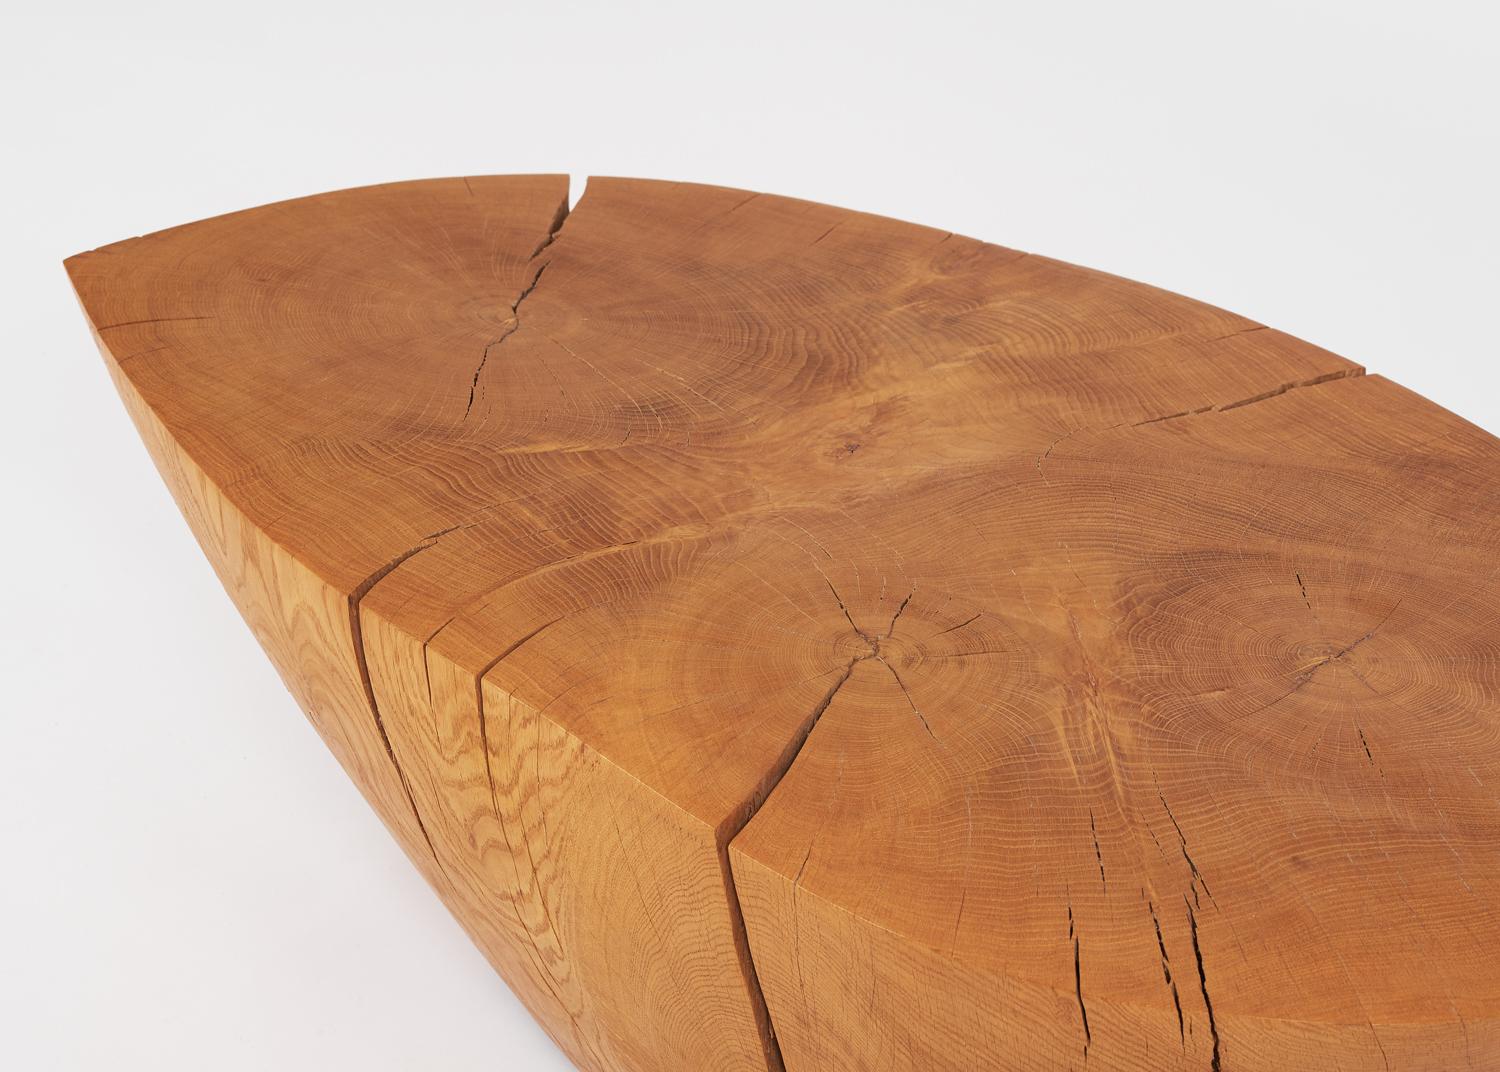 Der Stein by KASPAR HAMACHER, an organic shaped coffee table. Each piece is made from a solid piece of wood from naturally fallen trees.

Handmade in Belgium, Der Stein is made to order per your specifications.

KASPAR HAMACHER is a designer born